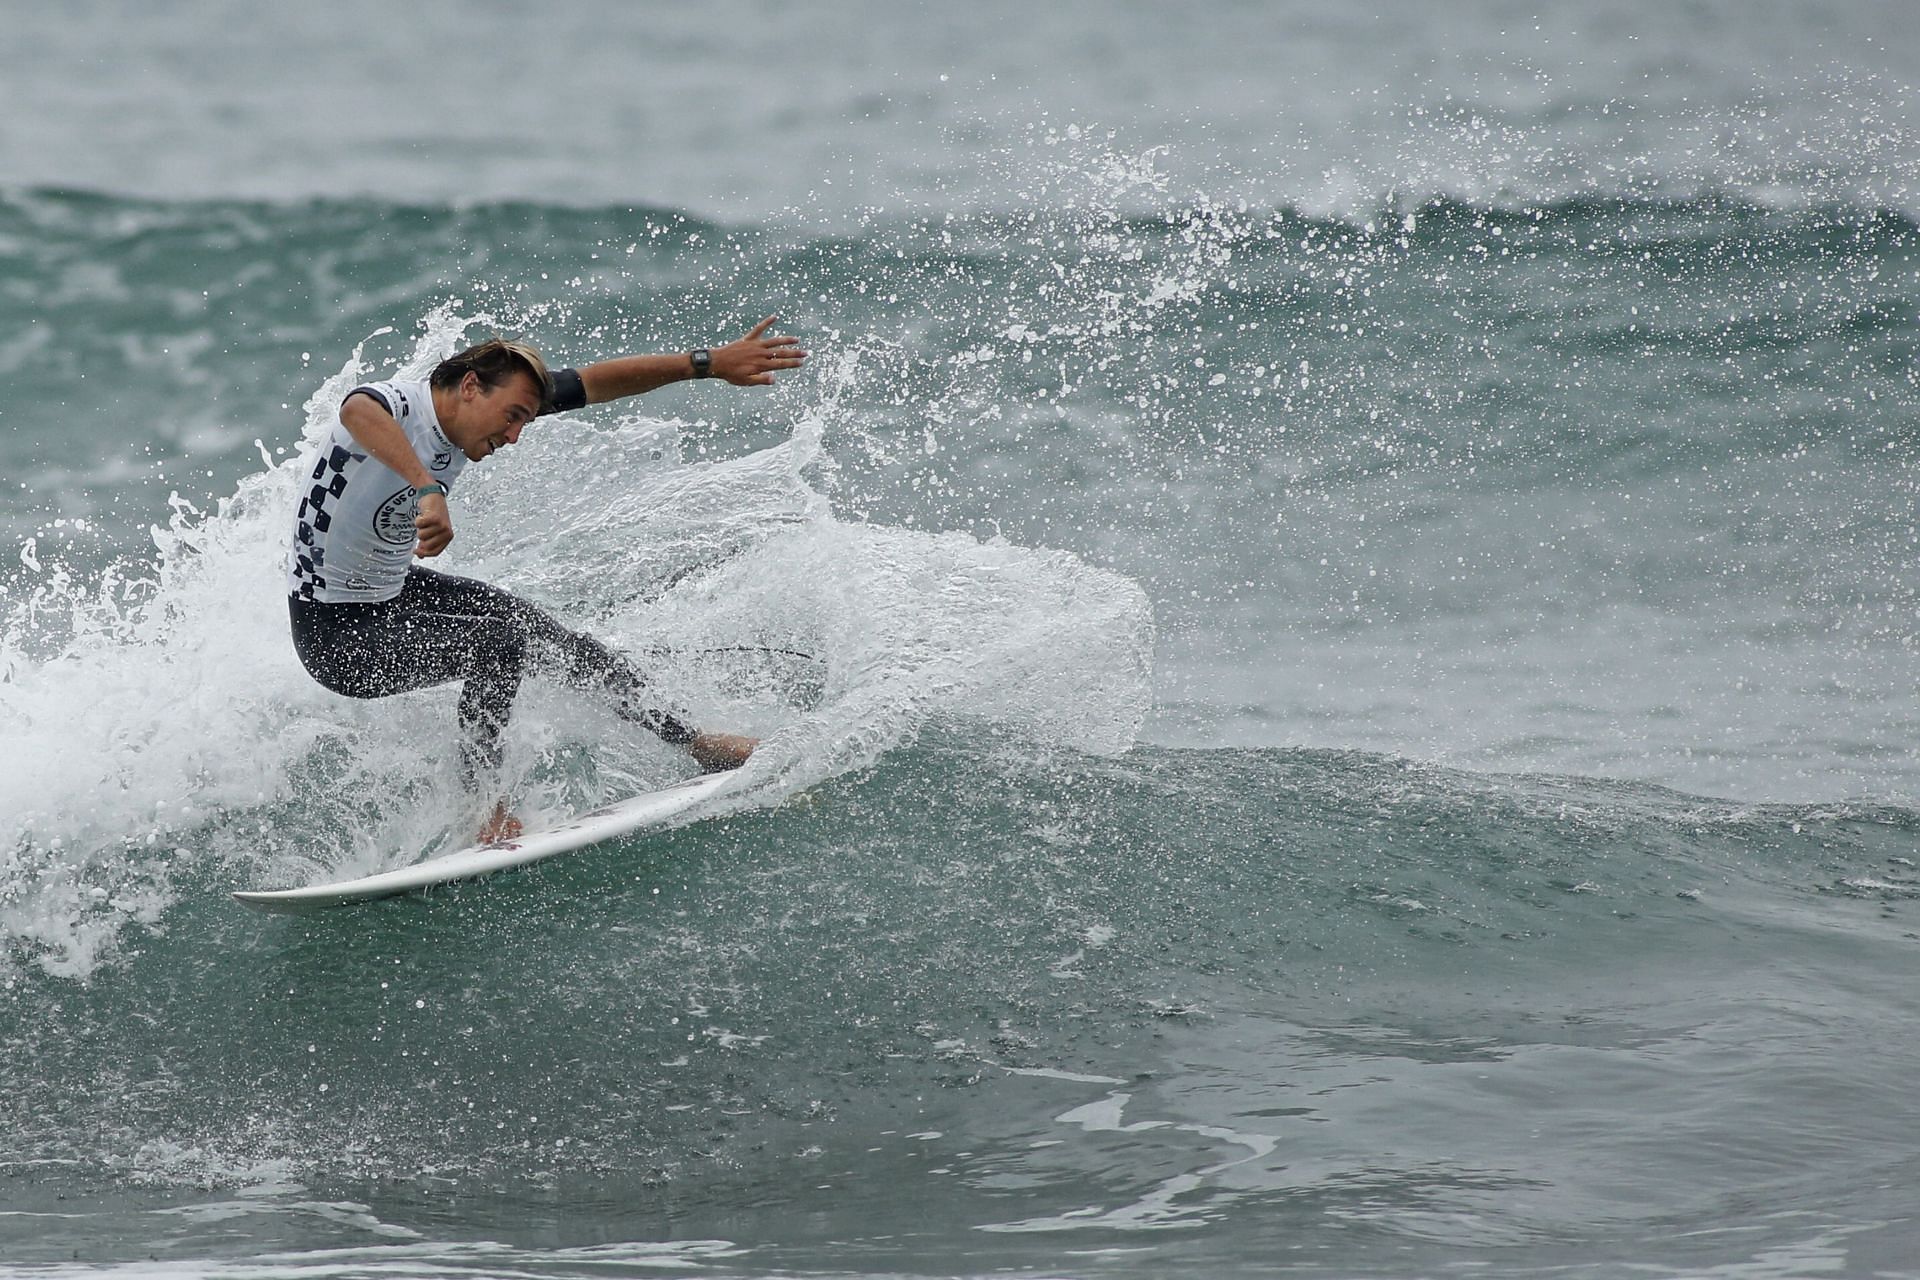 2019 VANS US Open of Surfing competition.